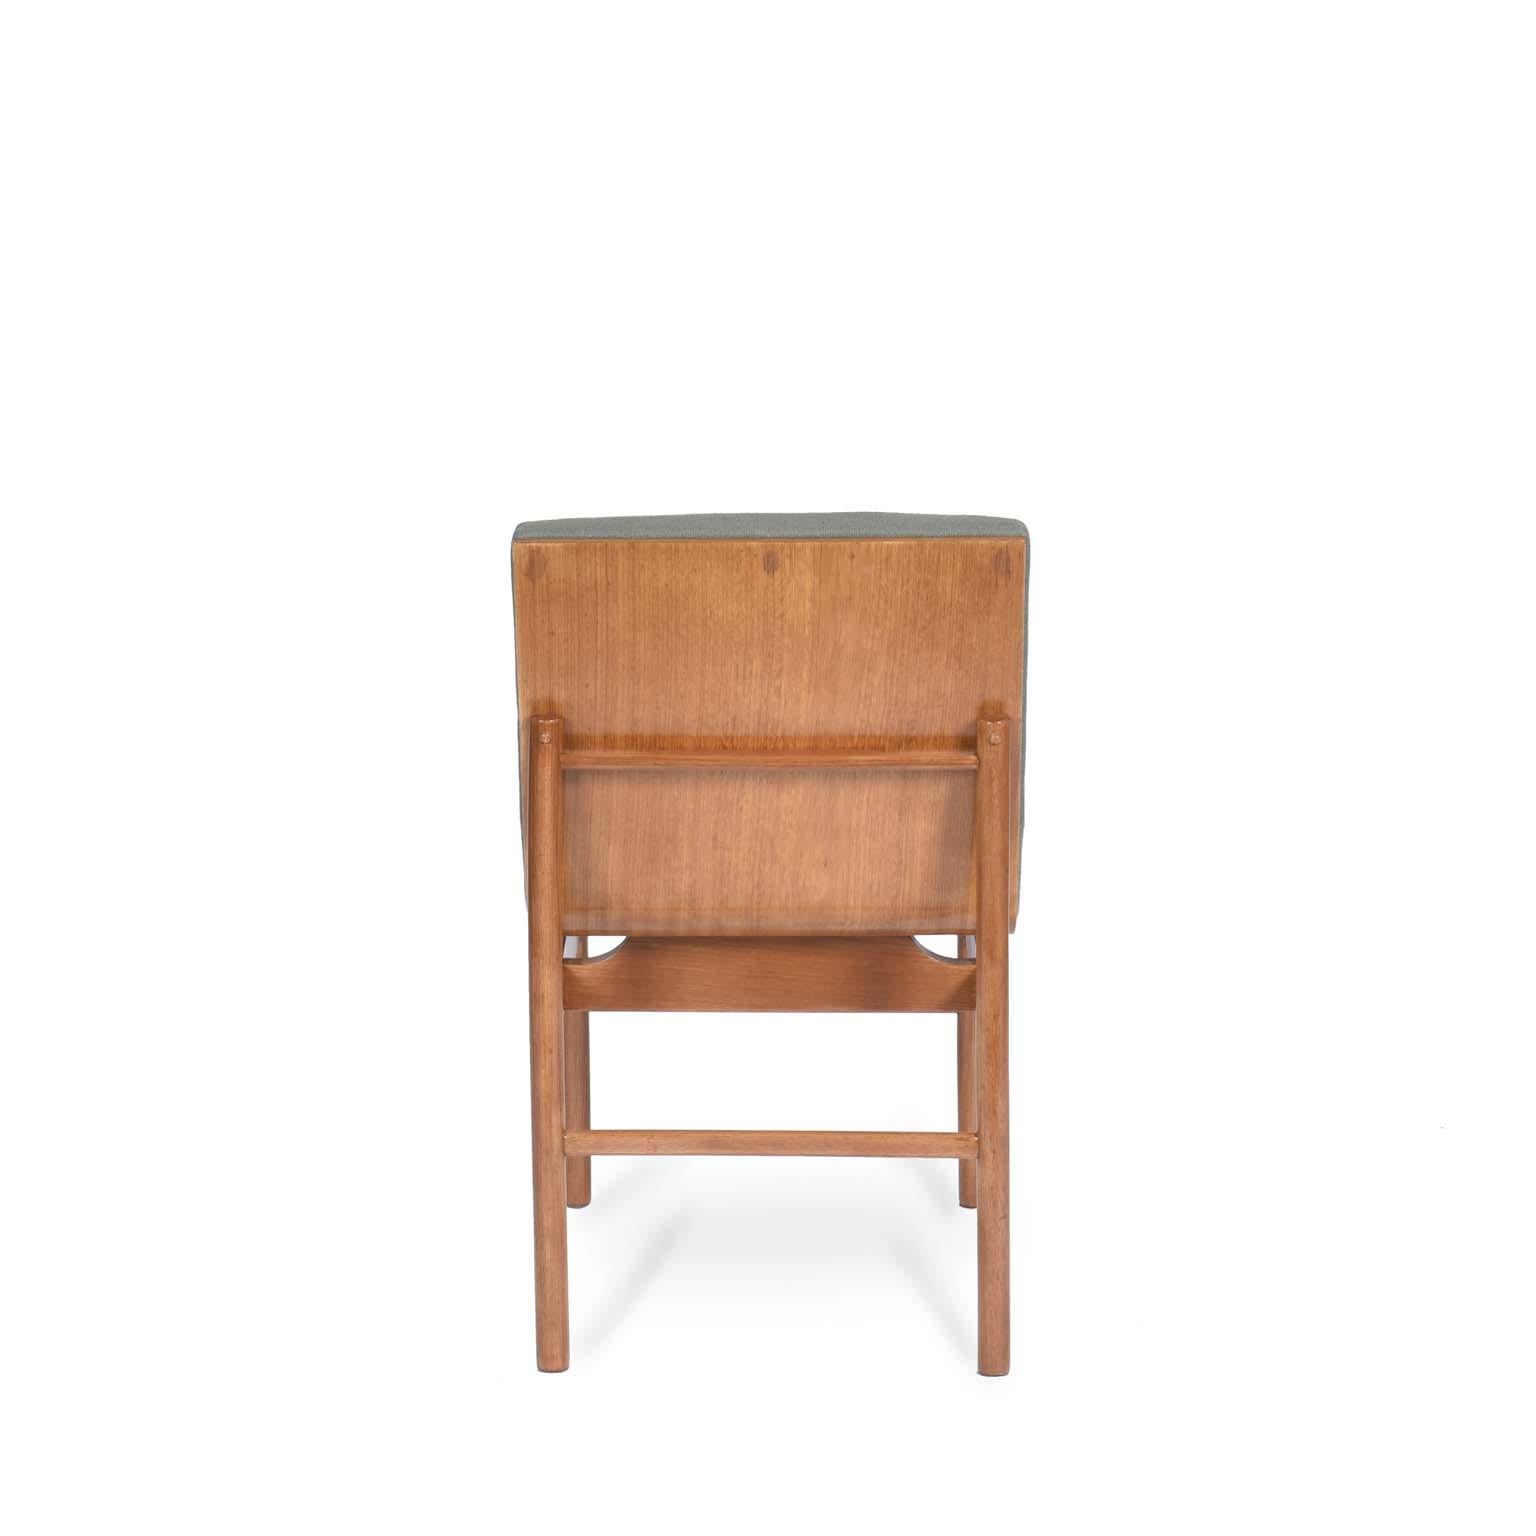 Novo Rumo midcentury Brazilian chair with Freijó wood structure, 1960s.

Francesco Scapinelli, younger brother of the famous designer and architect Giuseppe Scapinelli, decided to found Novo Rumo in the 1960s along with another Italian